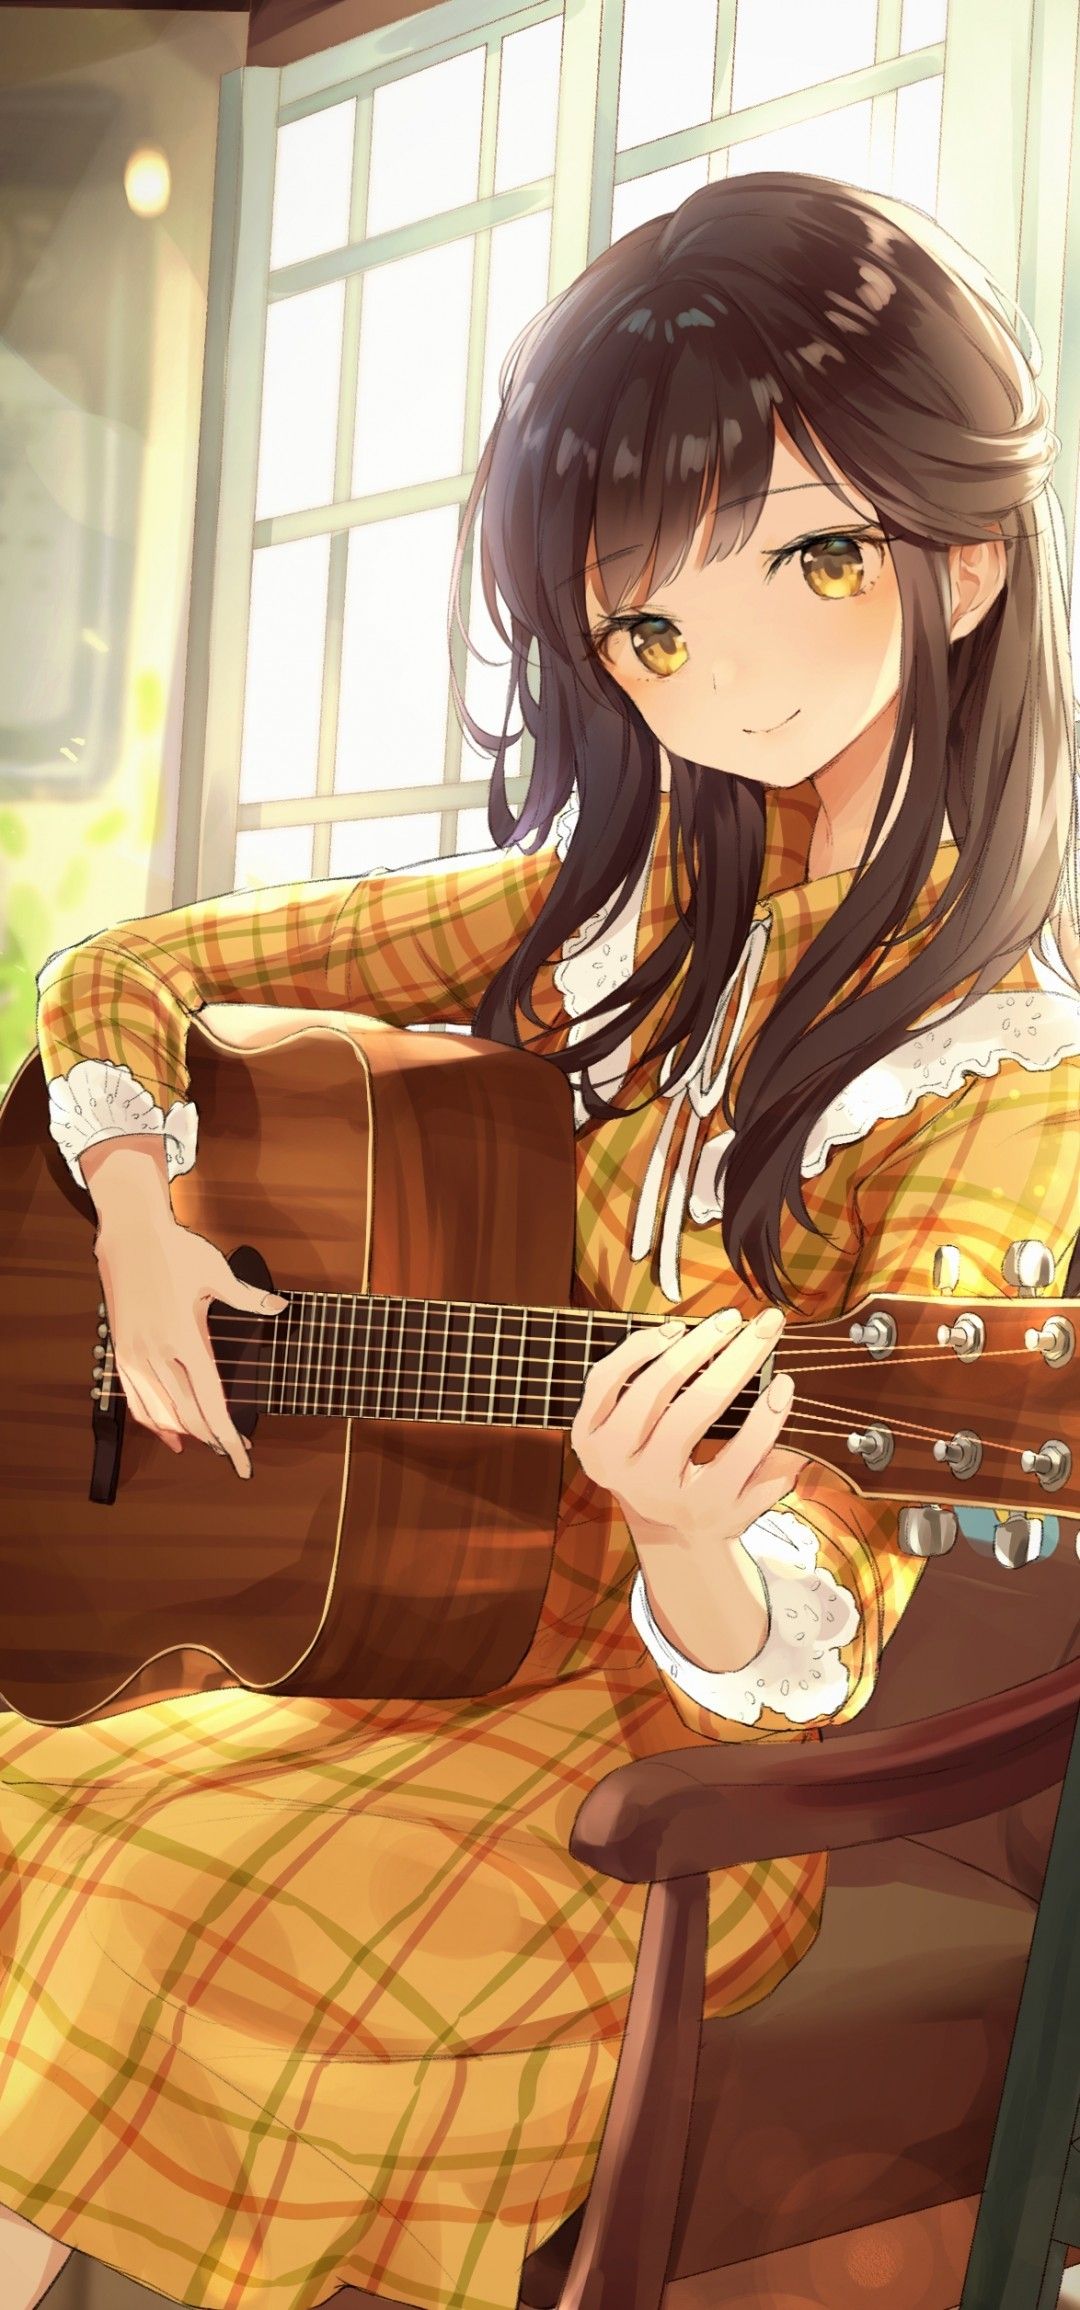 Anime Girl, Playing Guitar, Instrument, Music, Cute